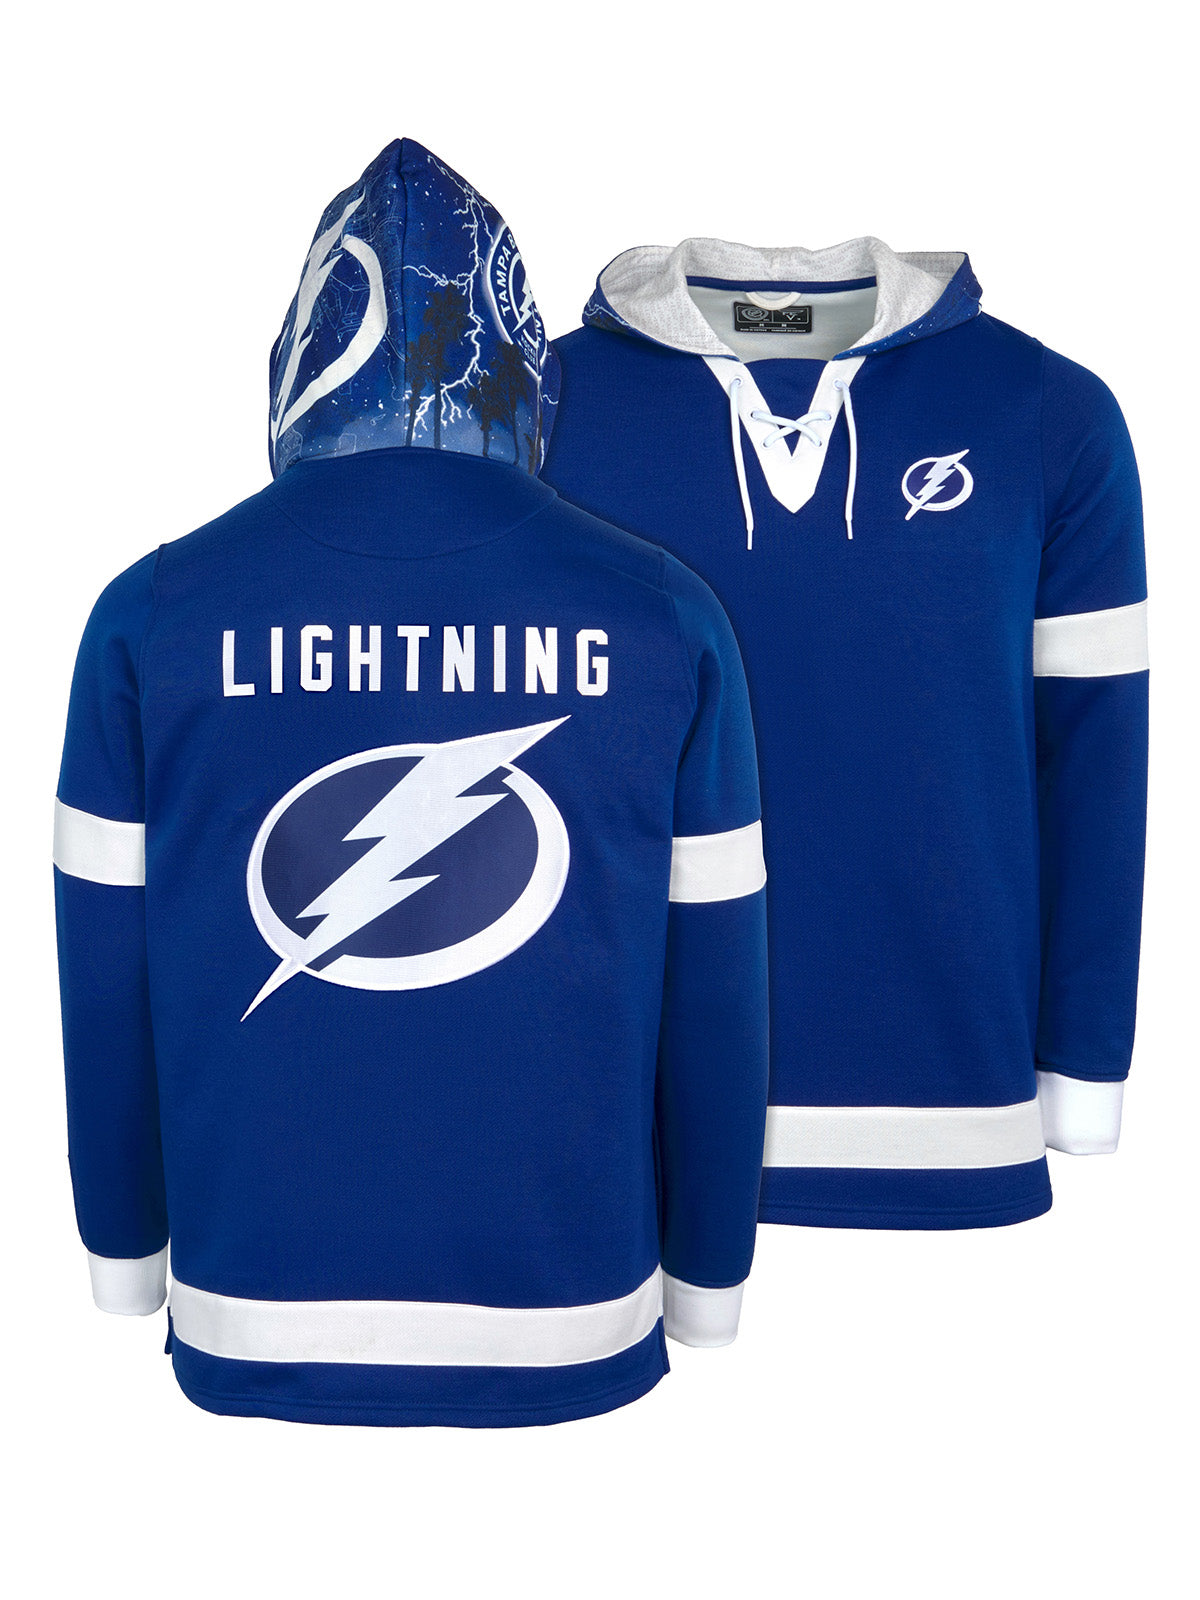 Tampa Bay Lightning Lace-Up Hoodie - Hand drawn custom hood designs with all the team colors and craftmanship to replicate the gameday jersey of this NHL hoodie